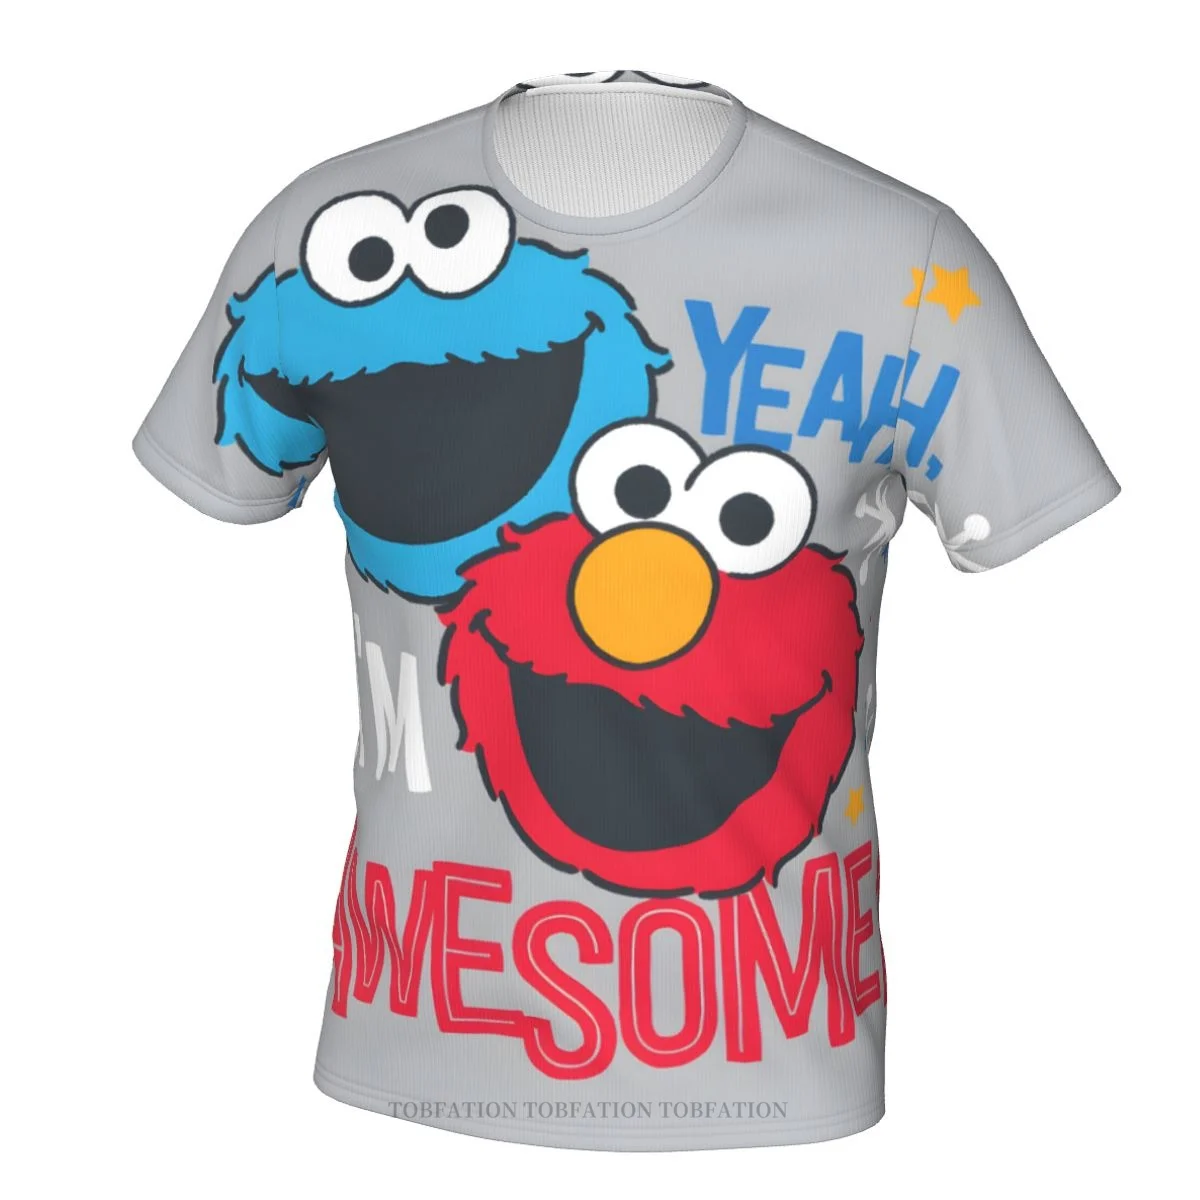 

Cookie Monster Elmo Awesome Sesame Street 80s TV Series 3D Printed Unisex Polyester Men Women Tshirt Loose Fitness Tops